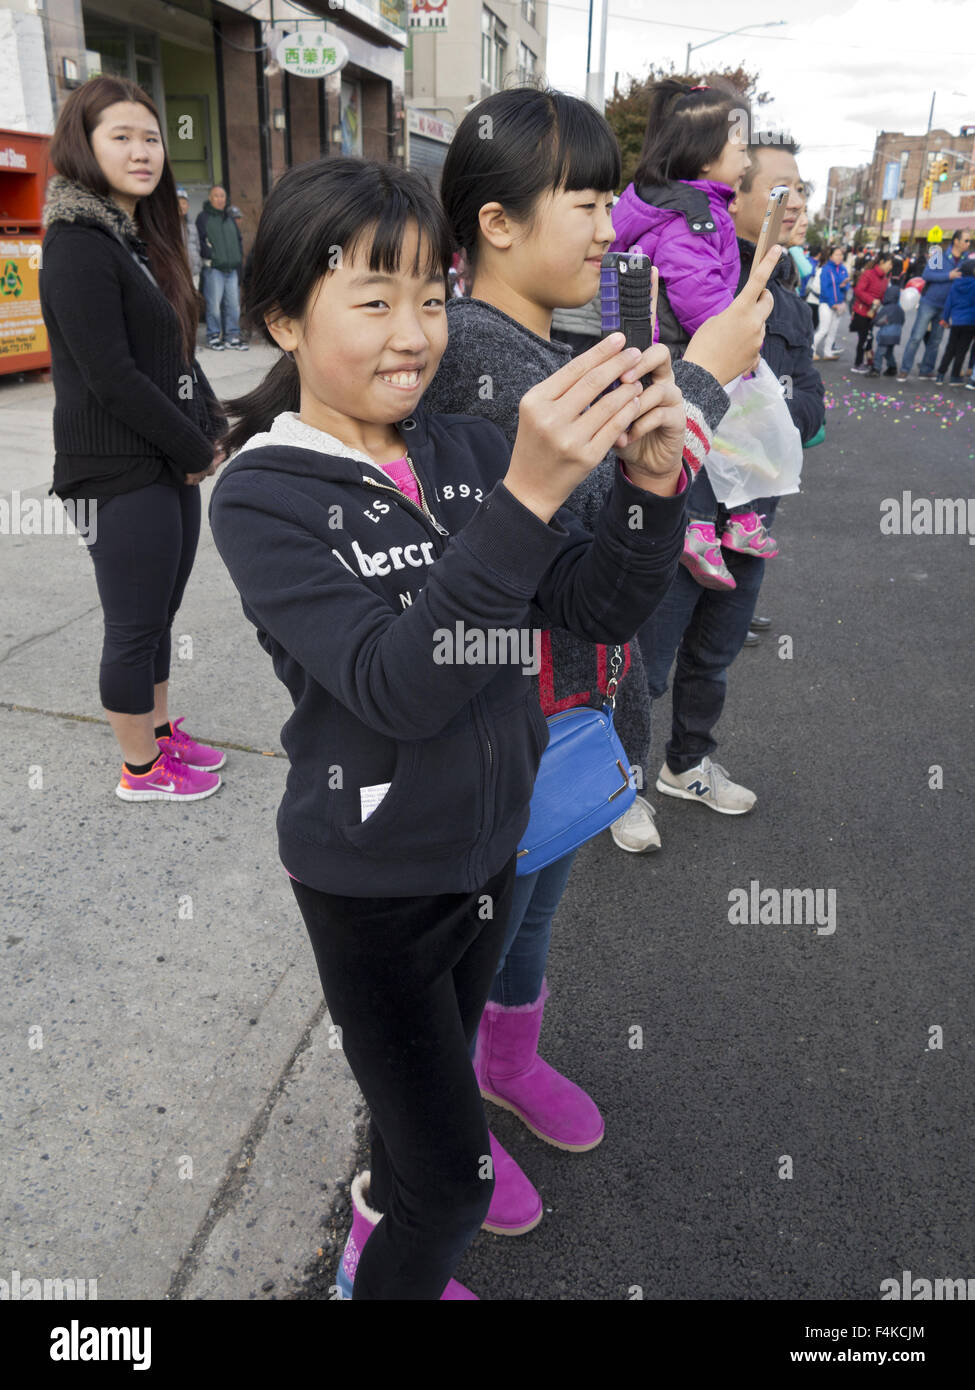 China-Tage-Festival und Laterne Parade in "Kleine Chinatown" in Sunset Park in Brooklyn, NY, Oct.18, 2015. Stockfoto